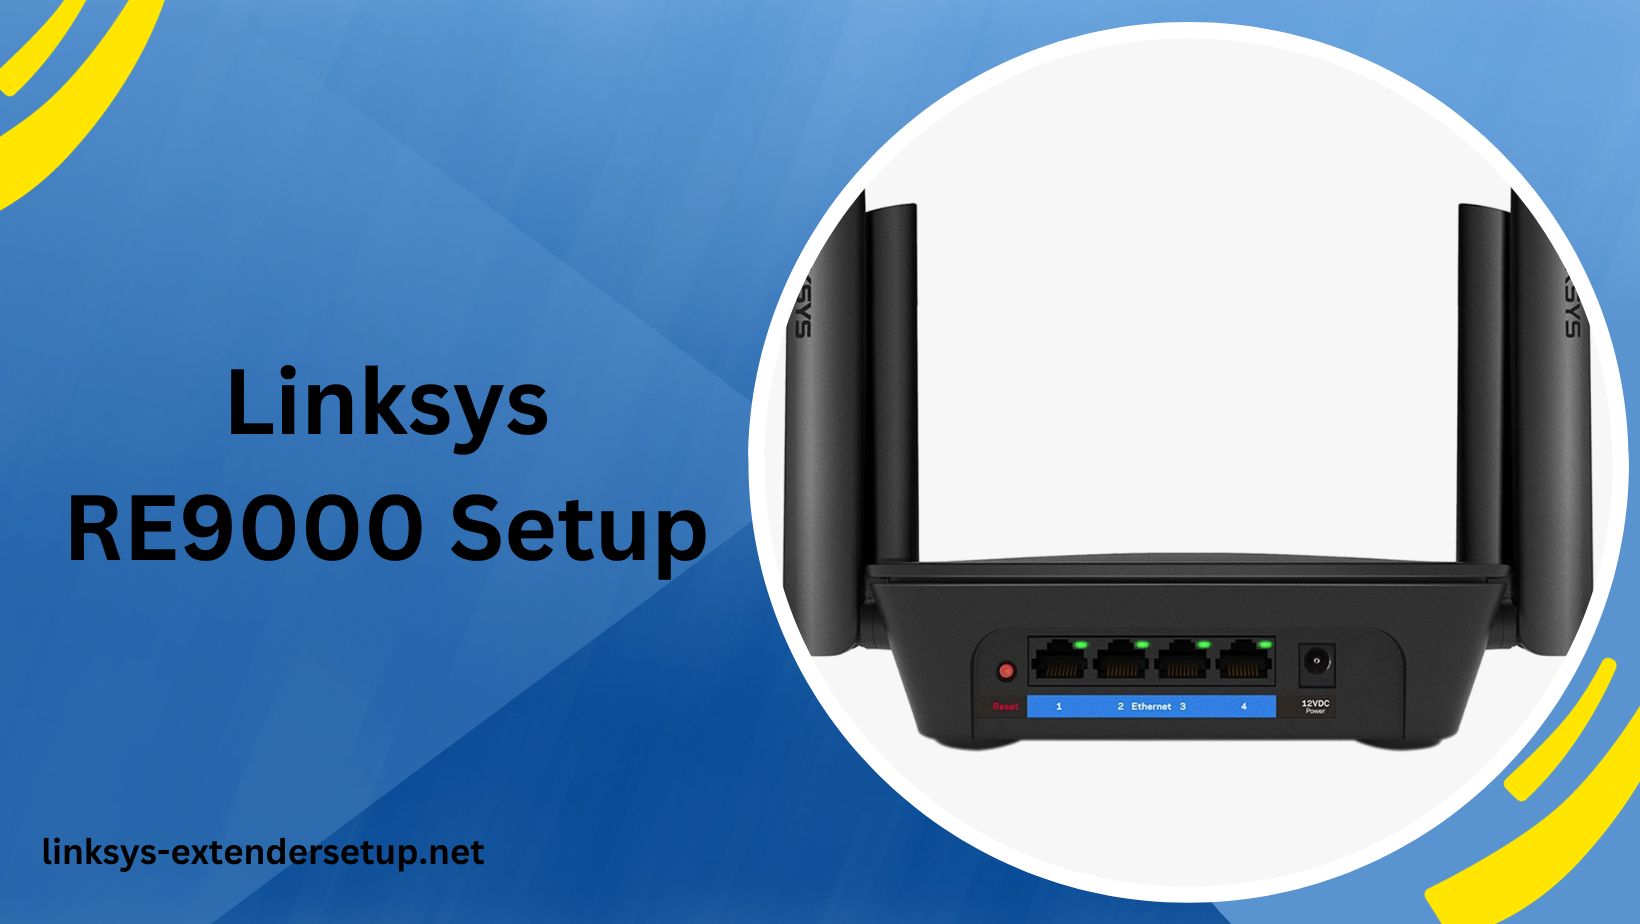 You are currently viewing Linksys RE9000 Setup Guide for Hassle-Free Networking